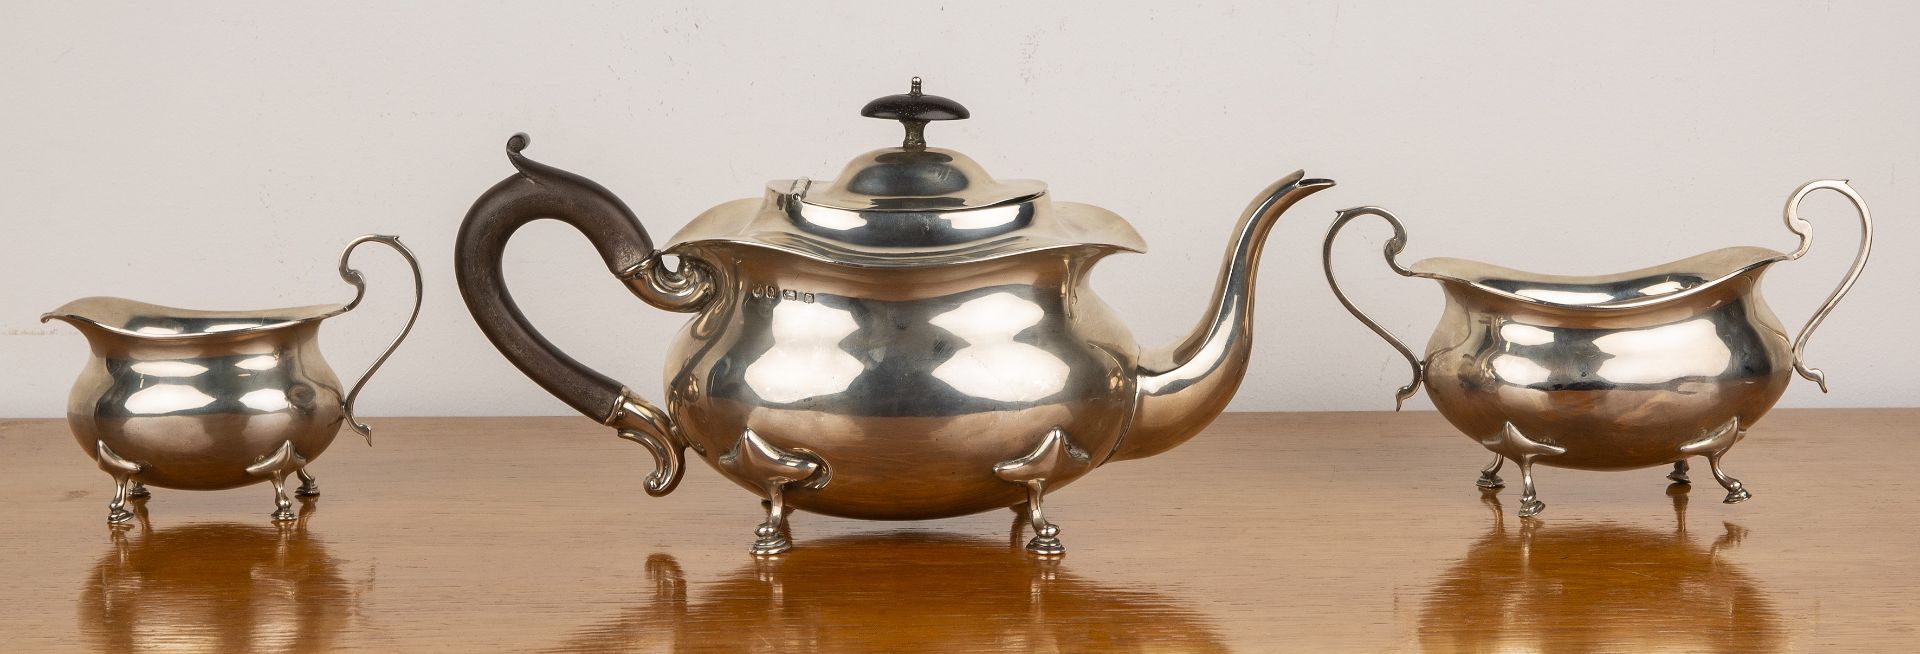 Three piece silver tea set comprising a teapot, twin handled sucrier and milk jug, all standing on - Image 2 of 5